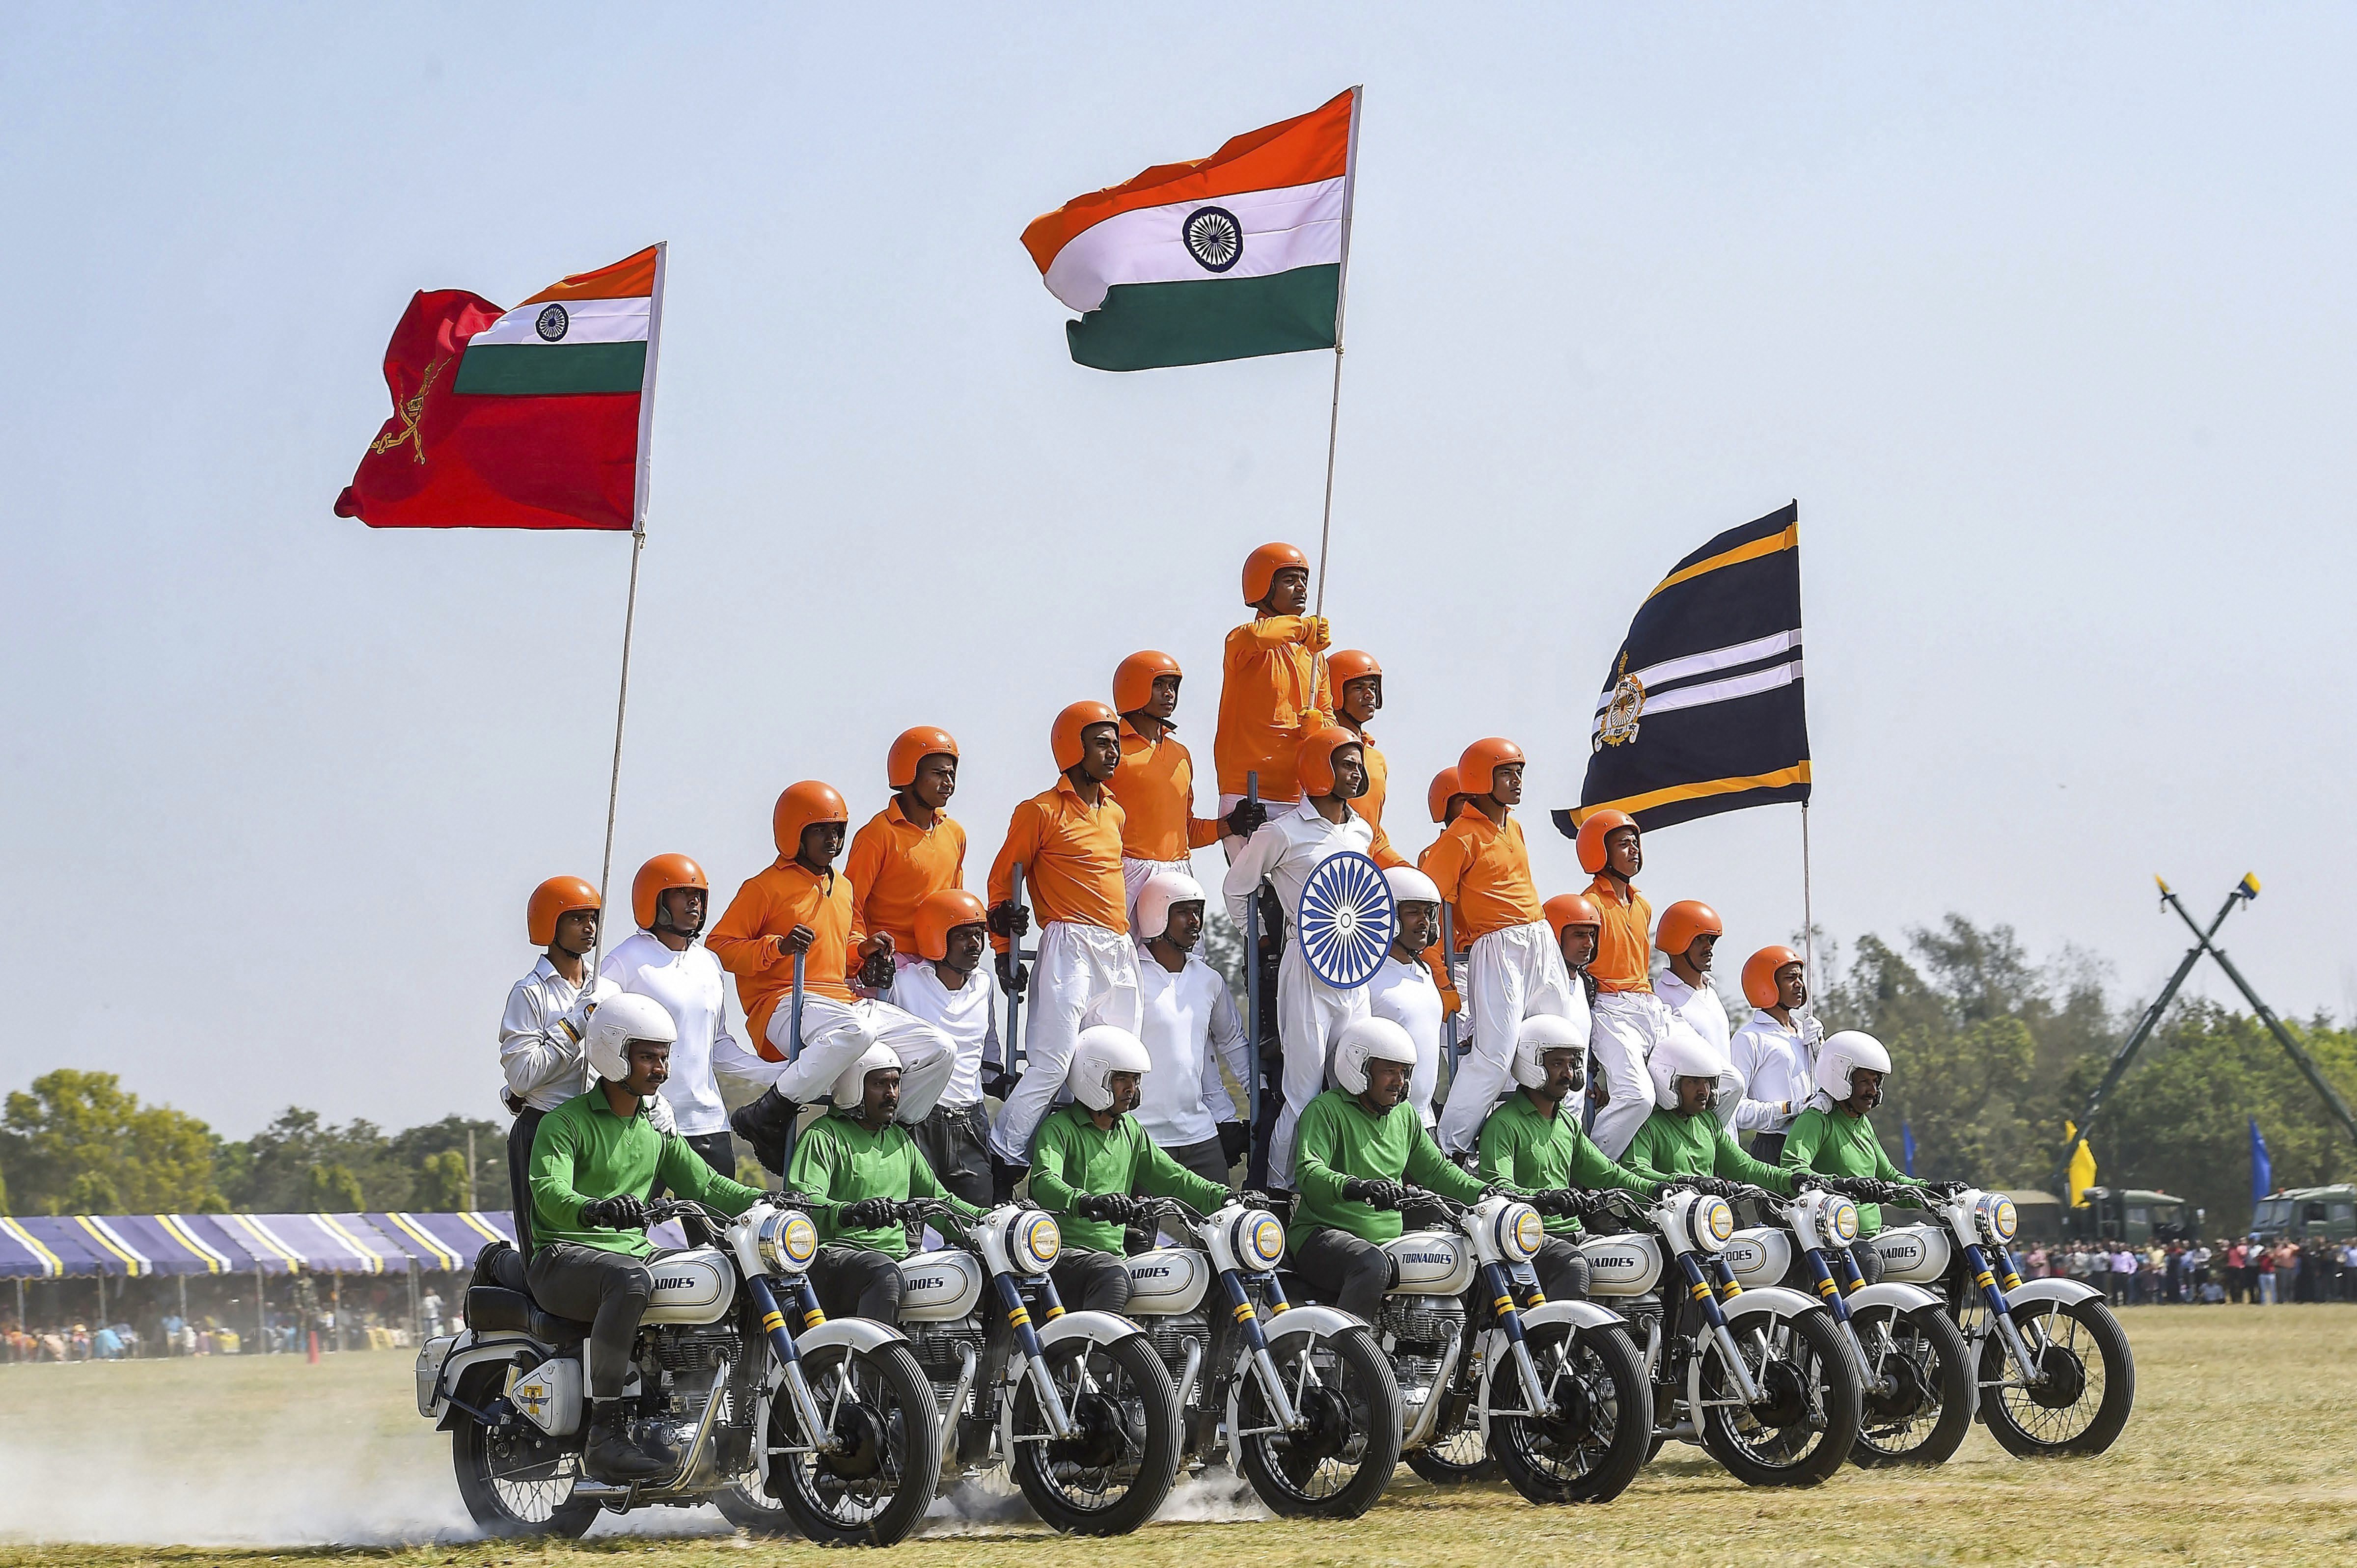 A motocycle team 'Tornadoes' of Army Service Corps display their skills during the celebration of 258th anniversary of Army Service Corps (ASC), in Bengaluru - PTI